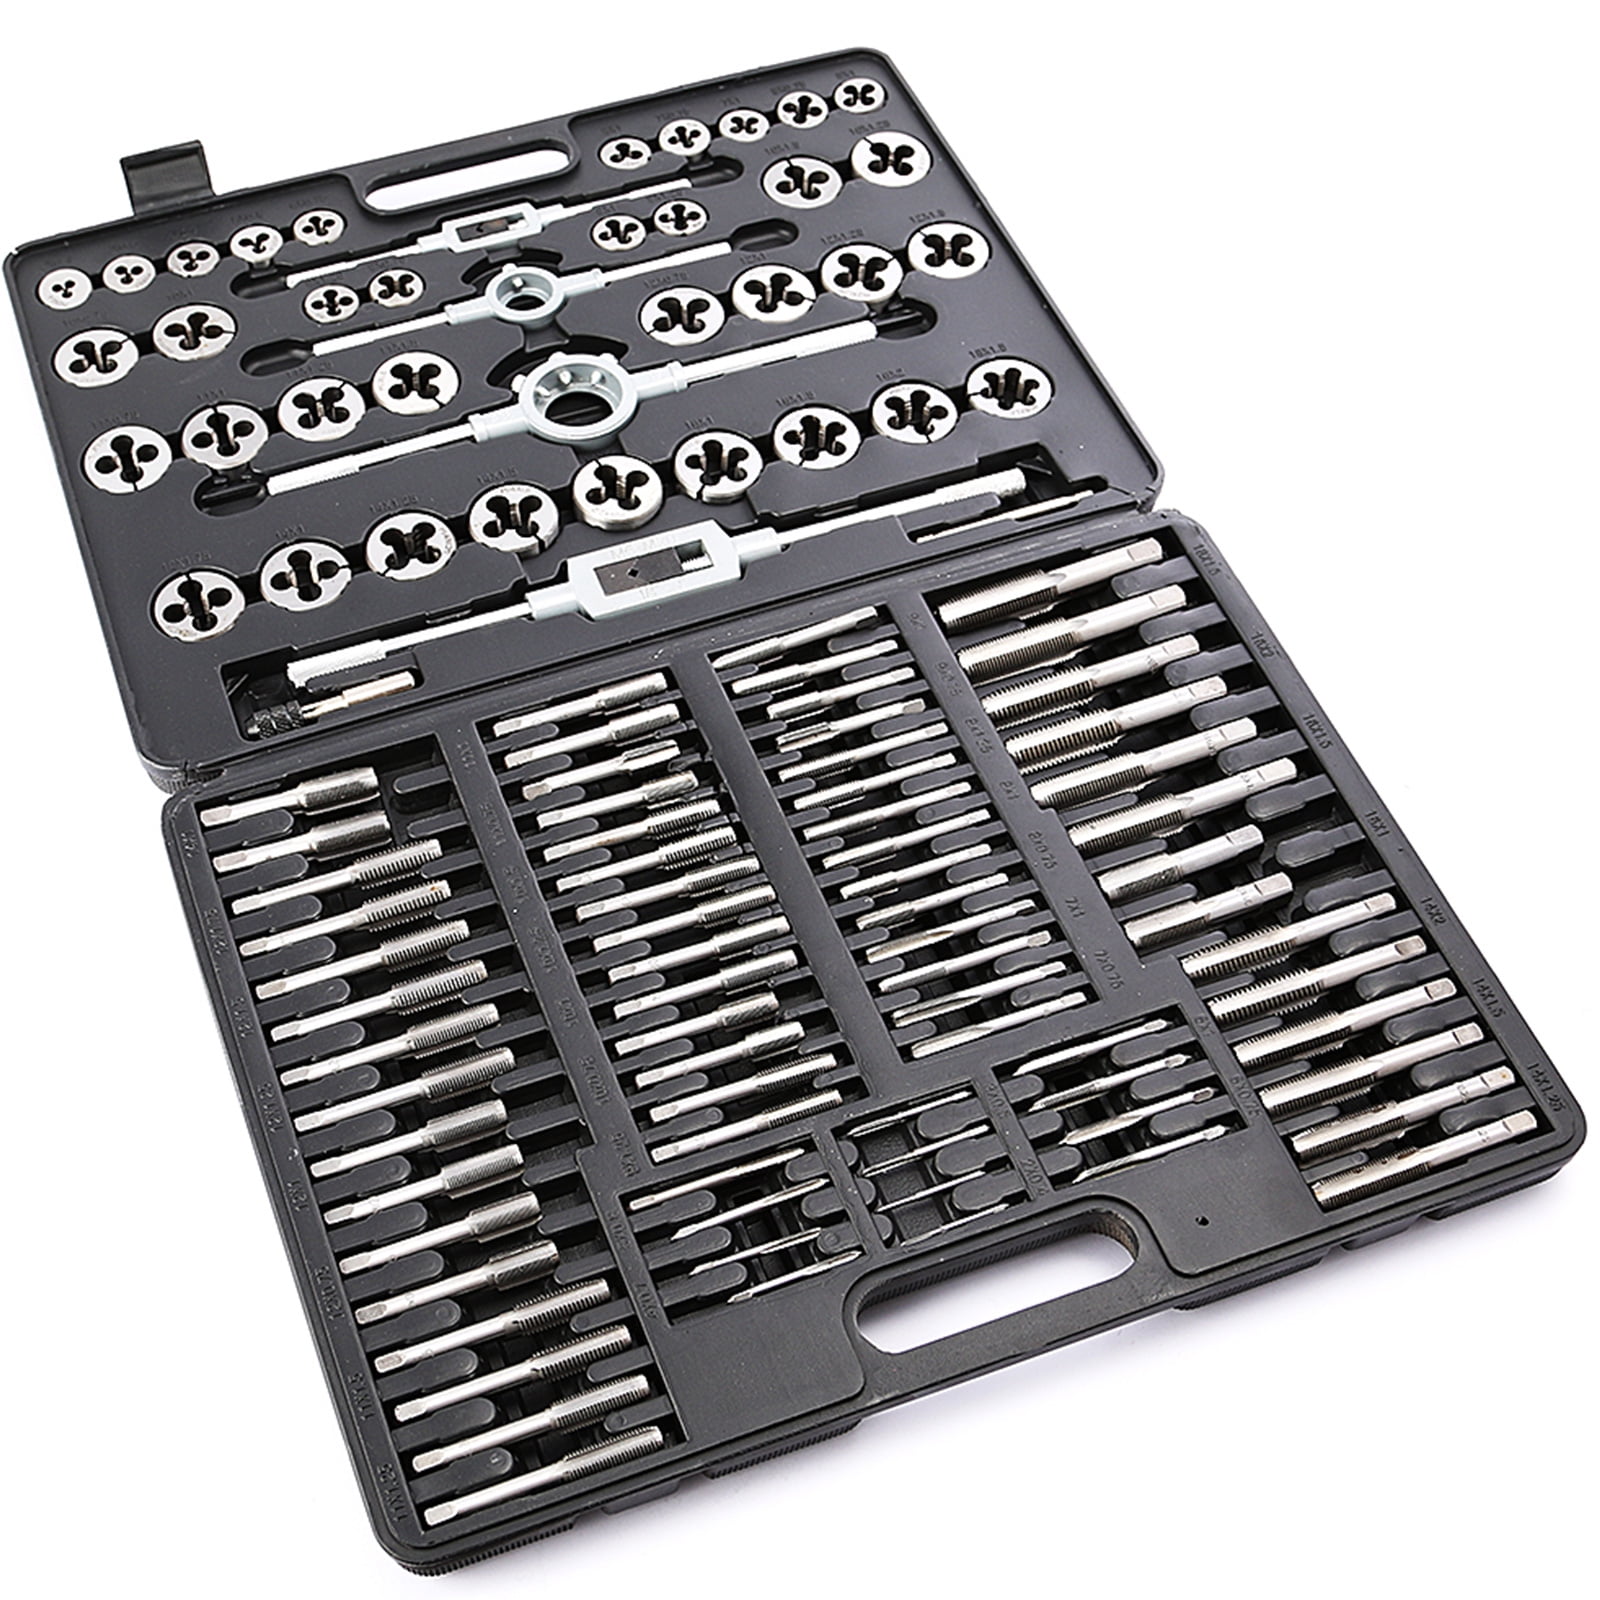 Threading Tool Kit with Complete Accessories for Garage BeHappy 110 PCS Tap and Die Set Metric and Standard Titanium Mechanics Workshop Thread Coated Metric Tap and Die Set with Storage 